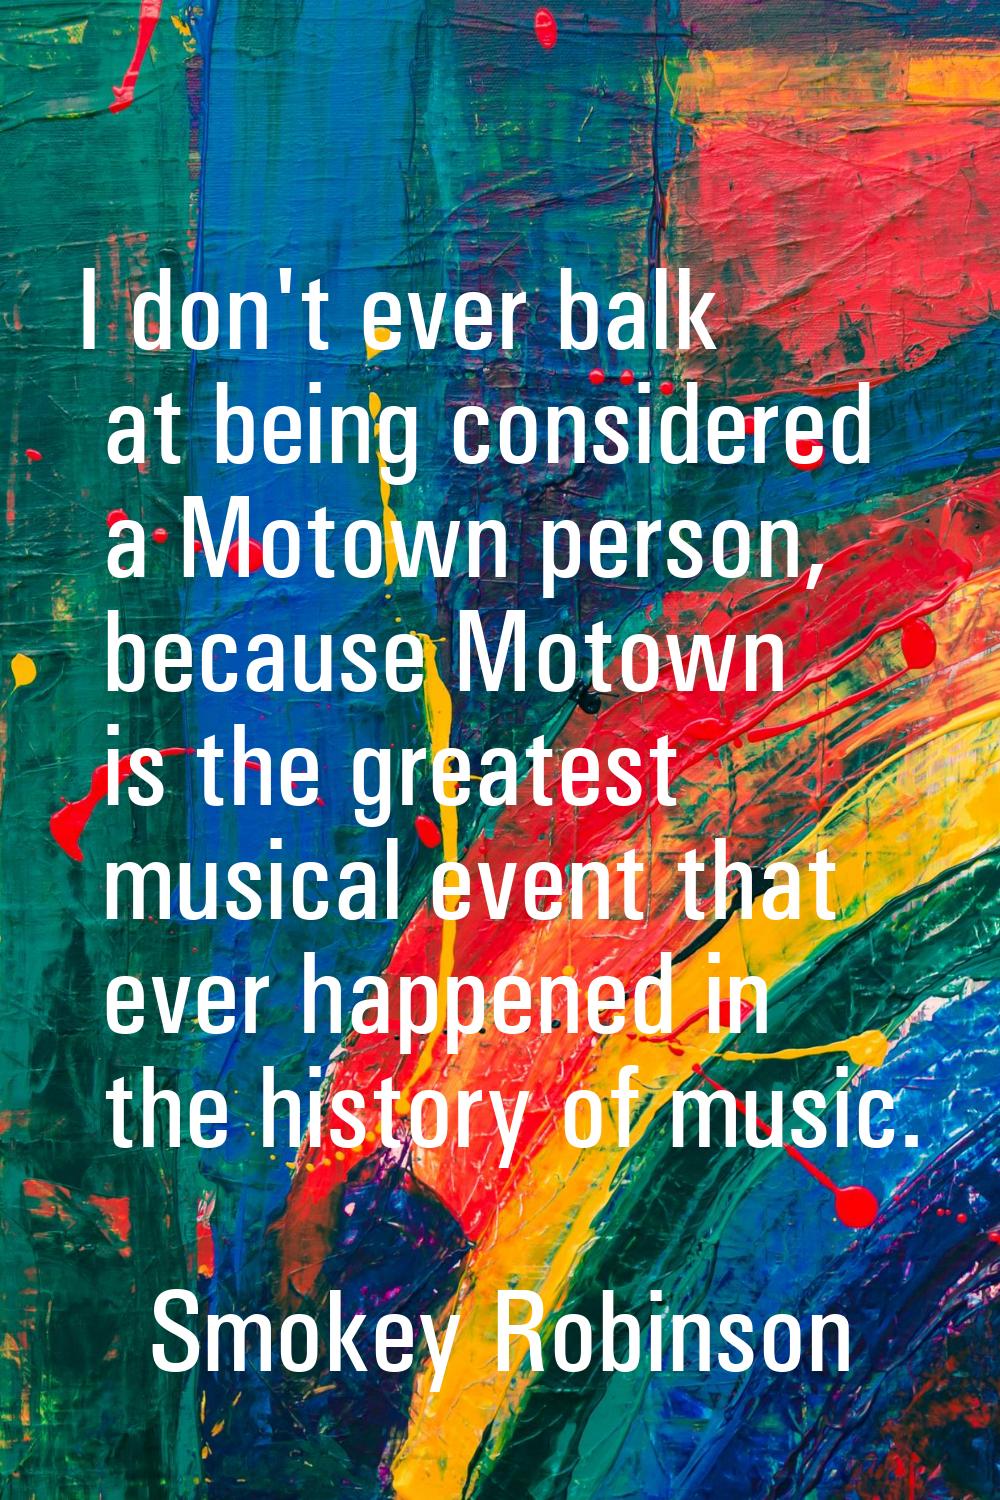 I don't ever balk at being considered a Motown person, because Motown is the greatest musical event